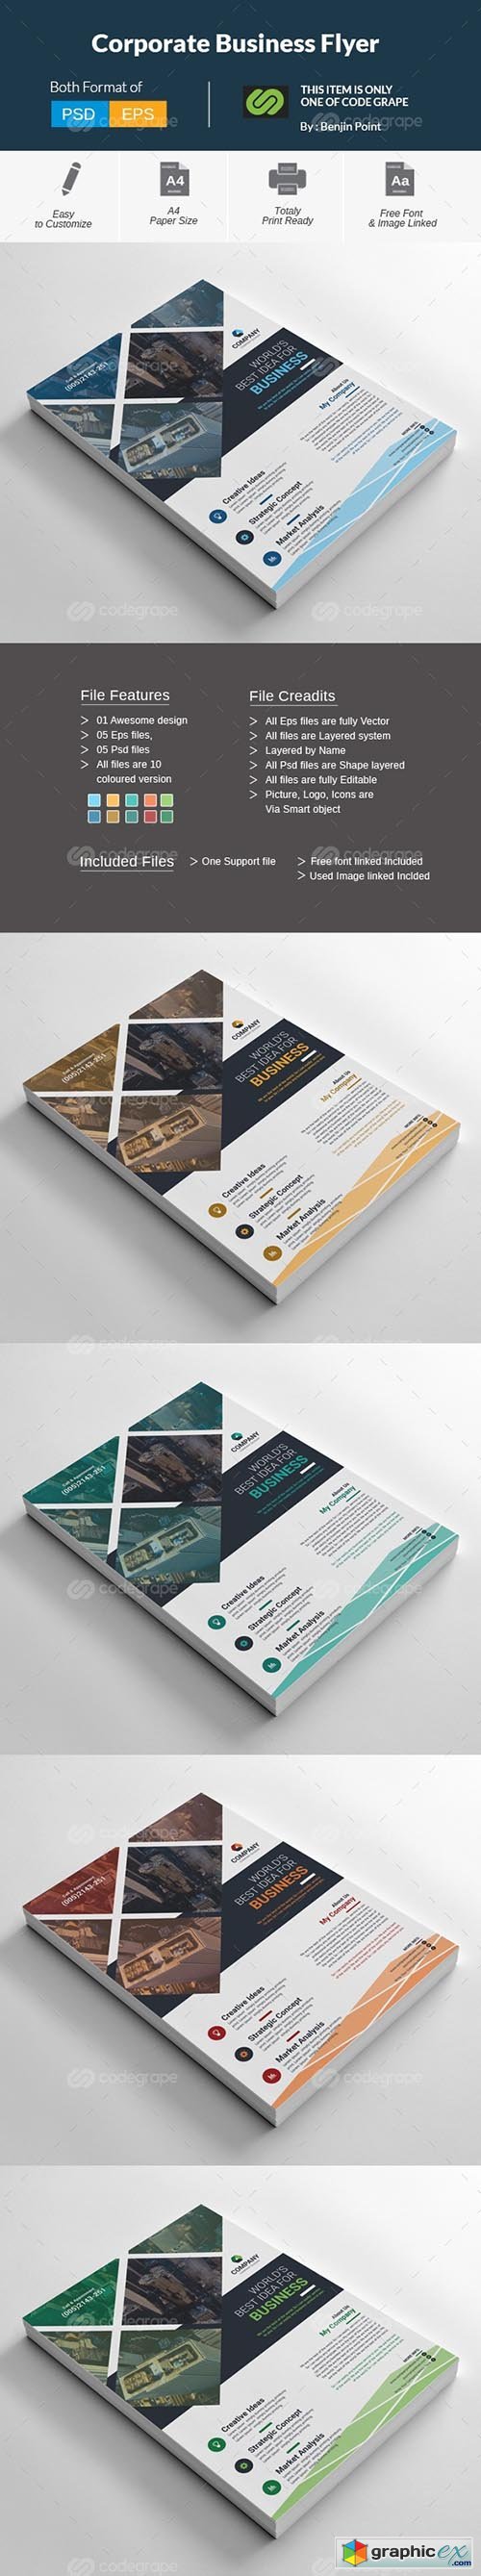 Corporate Business Flyer 11604